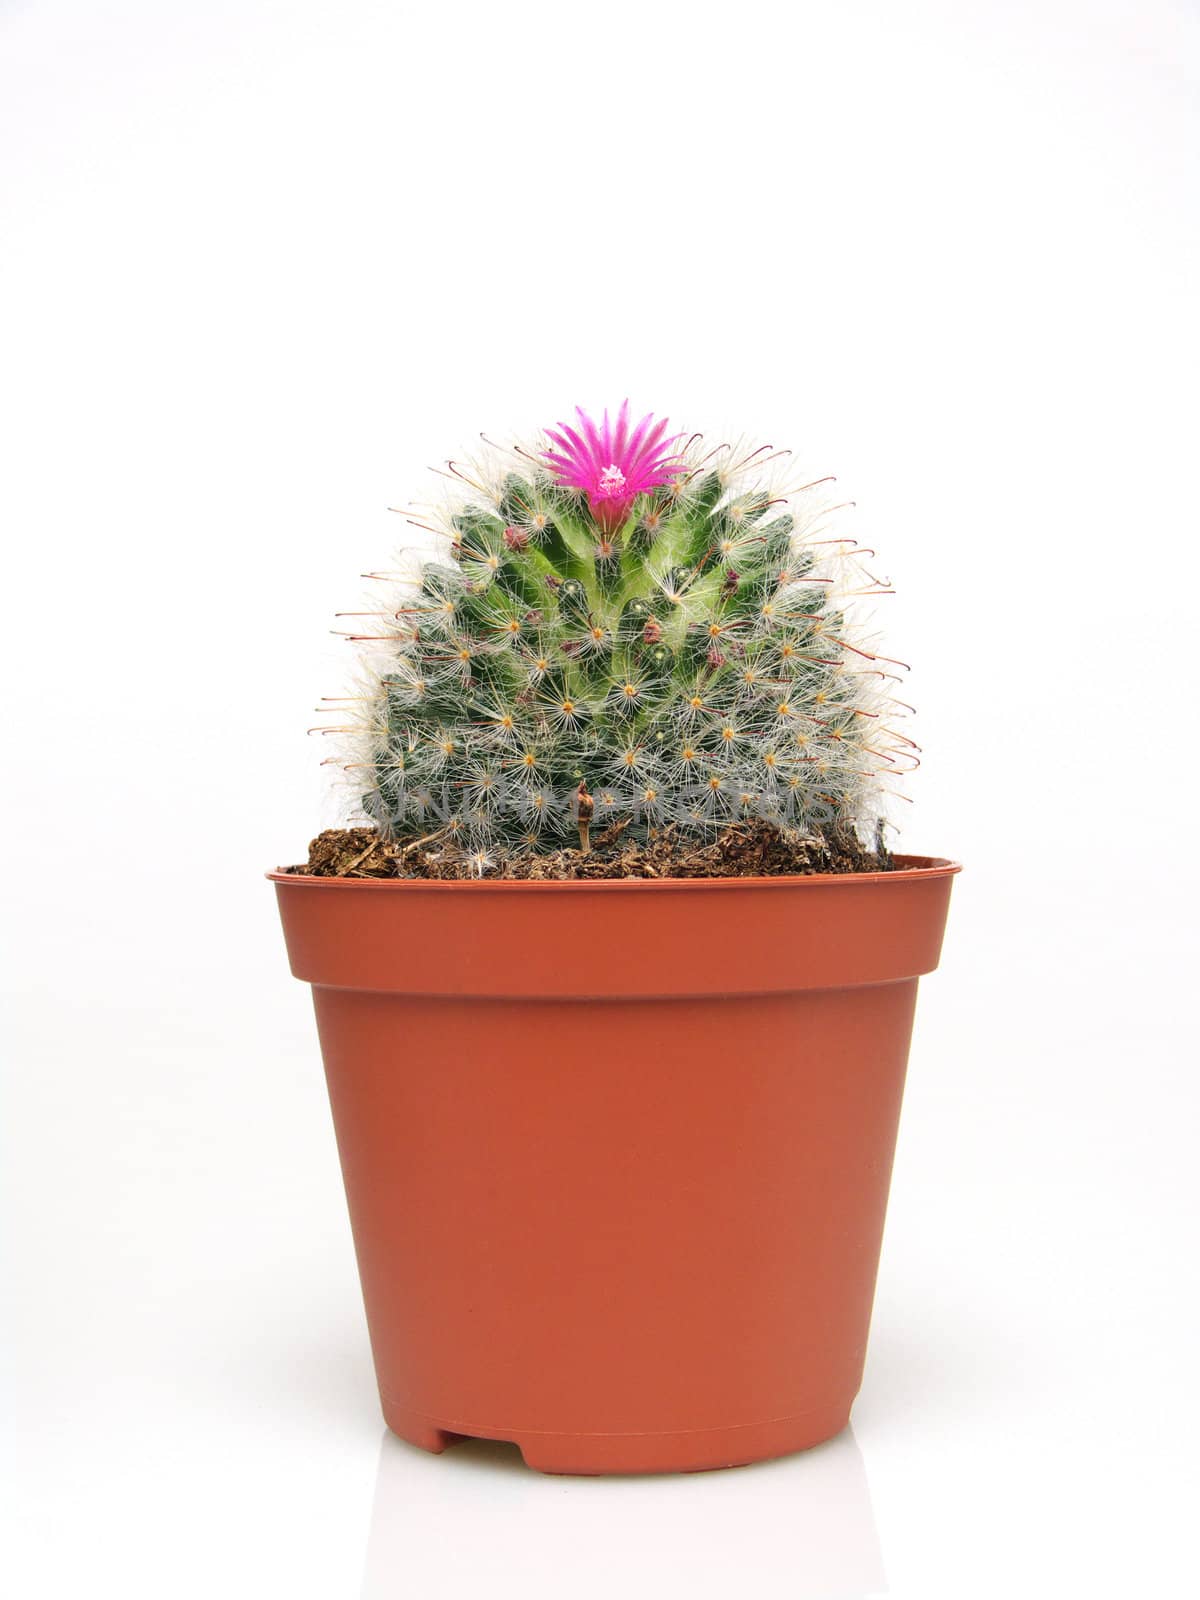 Blossoming cactus in a pot on white background. Studio shot